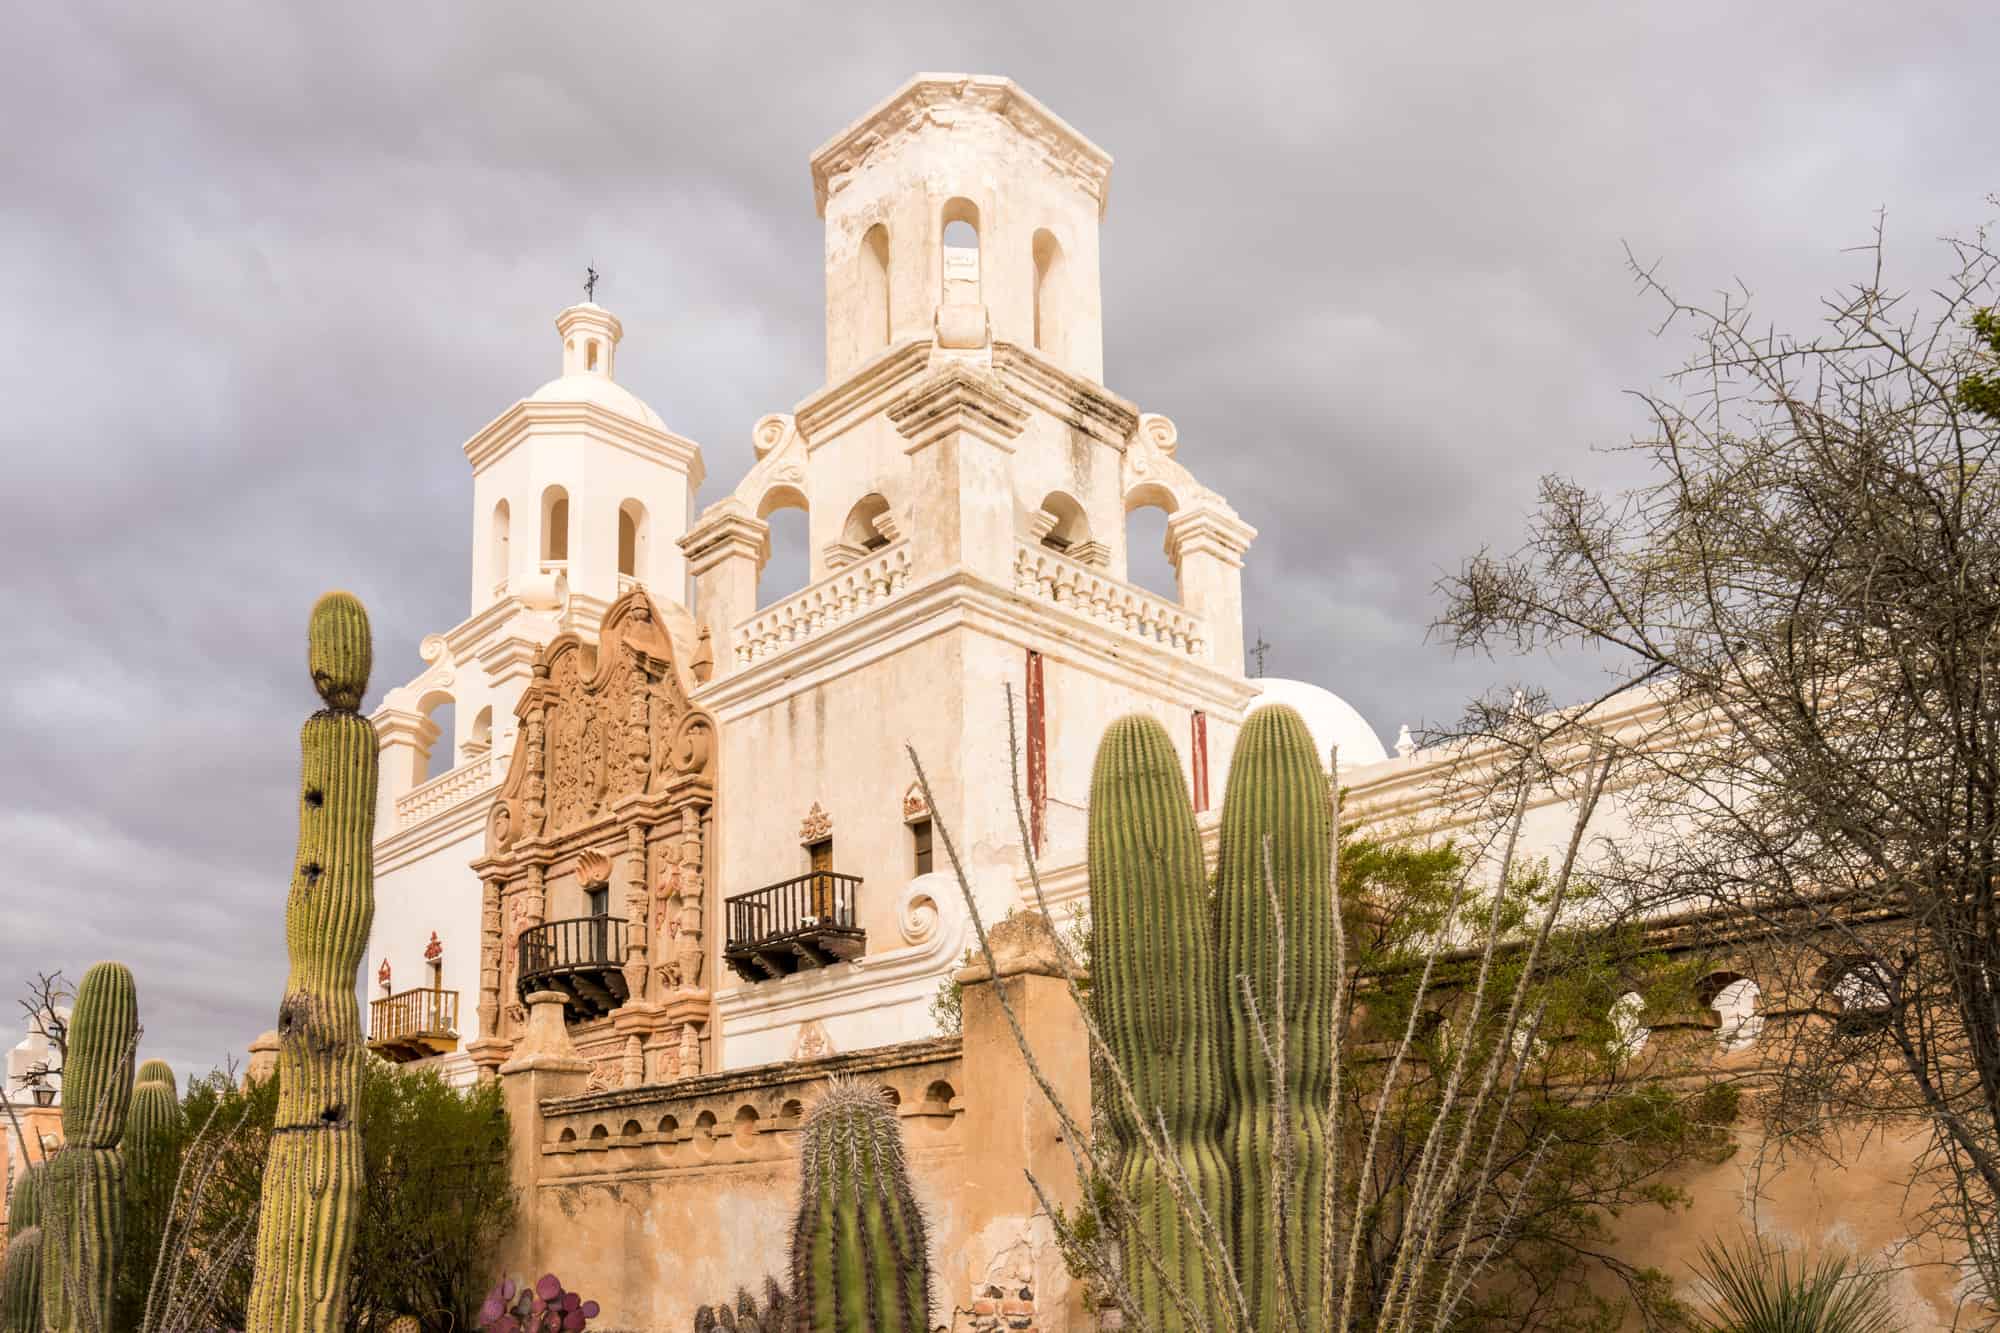 mission san xavier del bac from a slight angle and shot low so it appears large and fills the frame with dark clouds